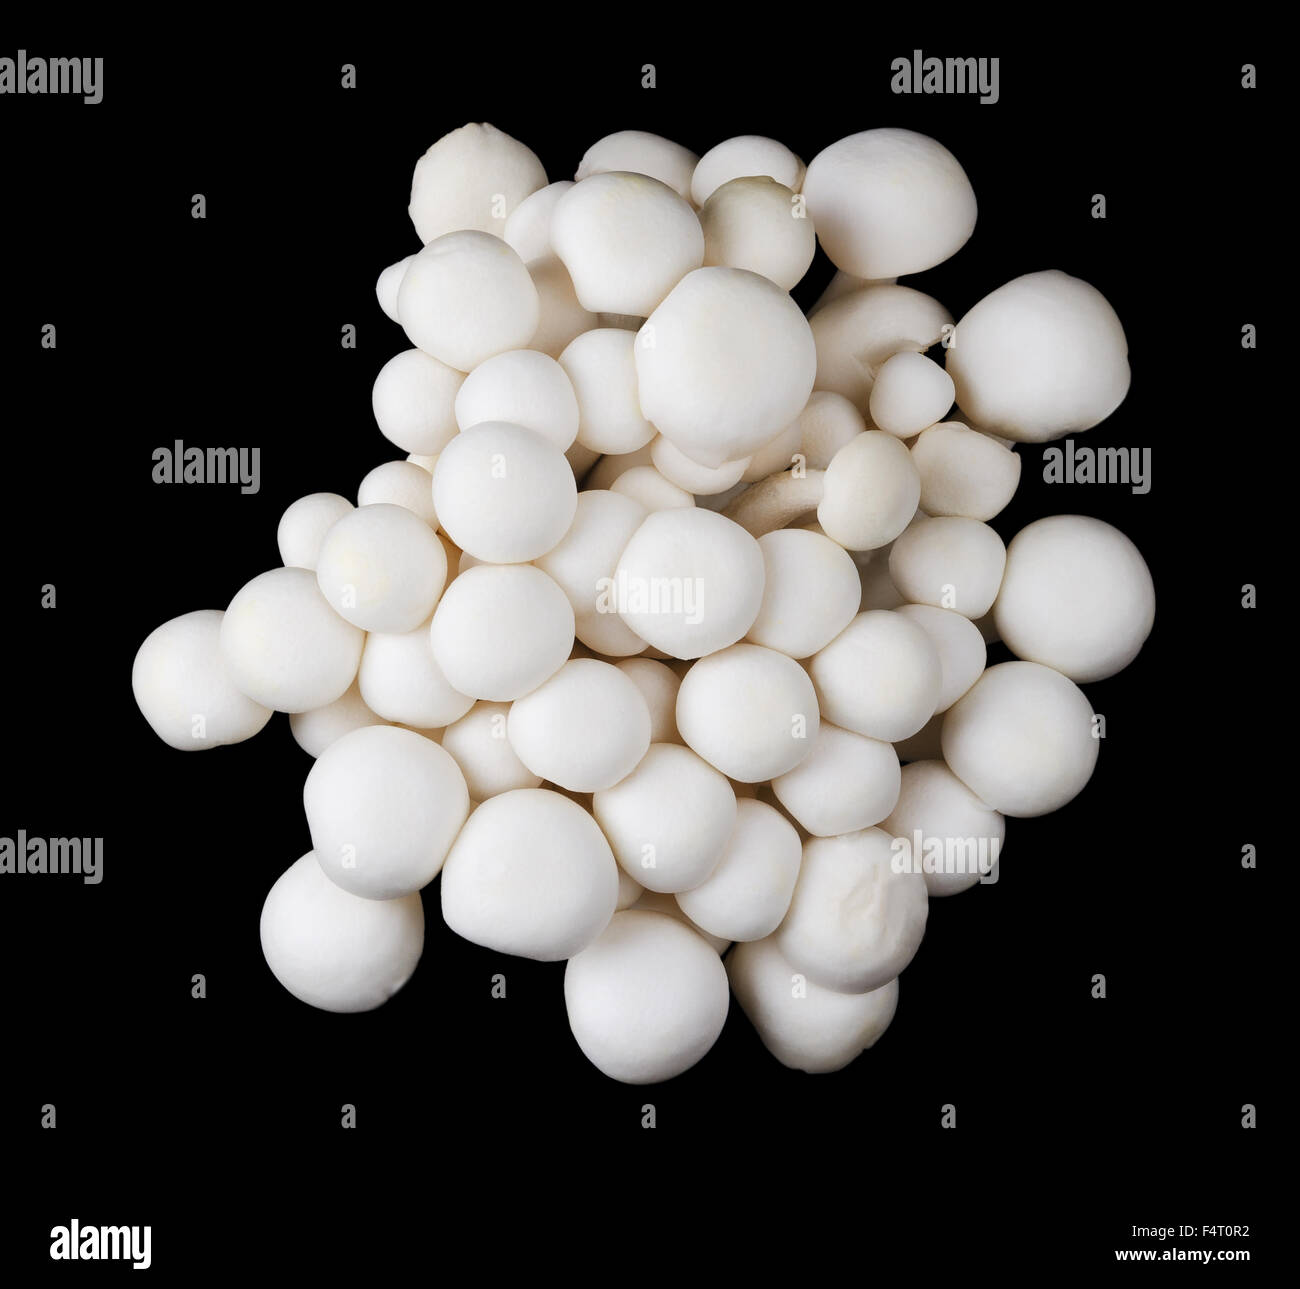 White beech mushrooms, bunapi shimeji, also called white clamshell mushrooms, an edible fungus on black background. Top view. Stock Photo